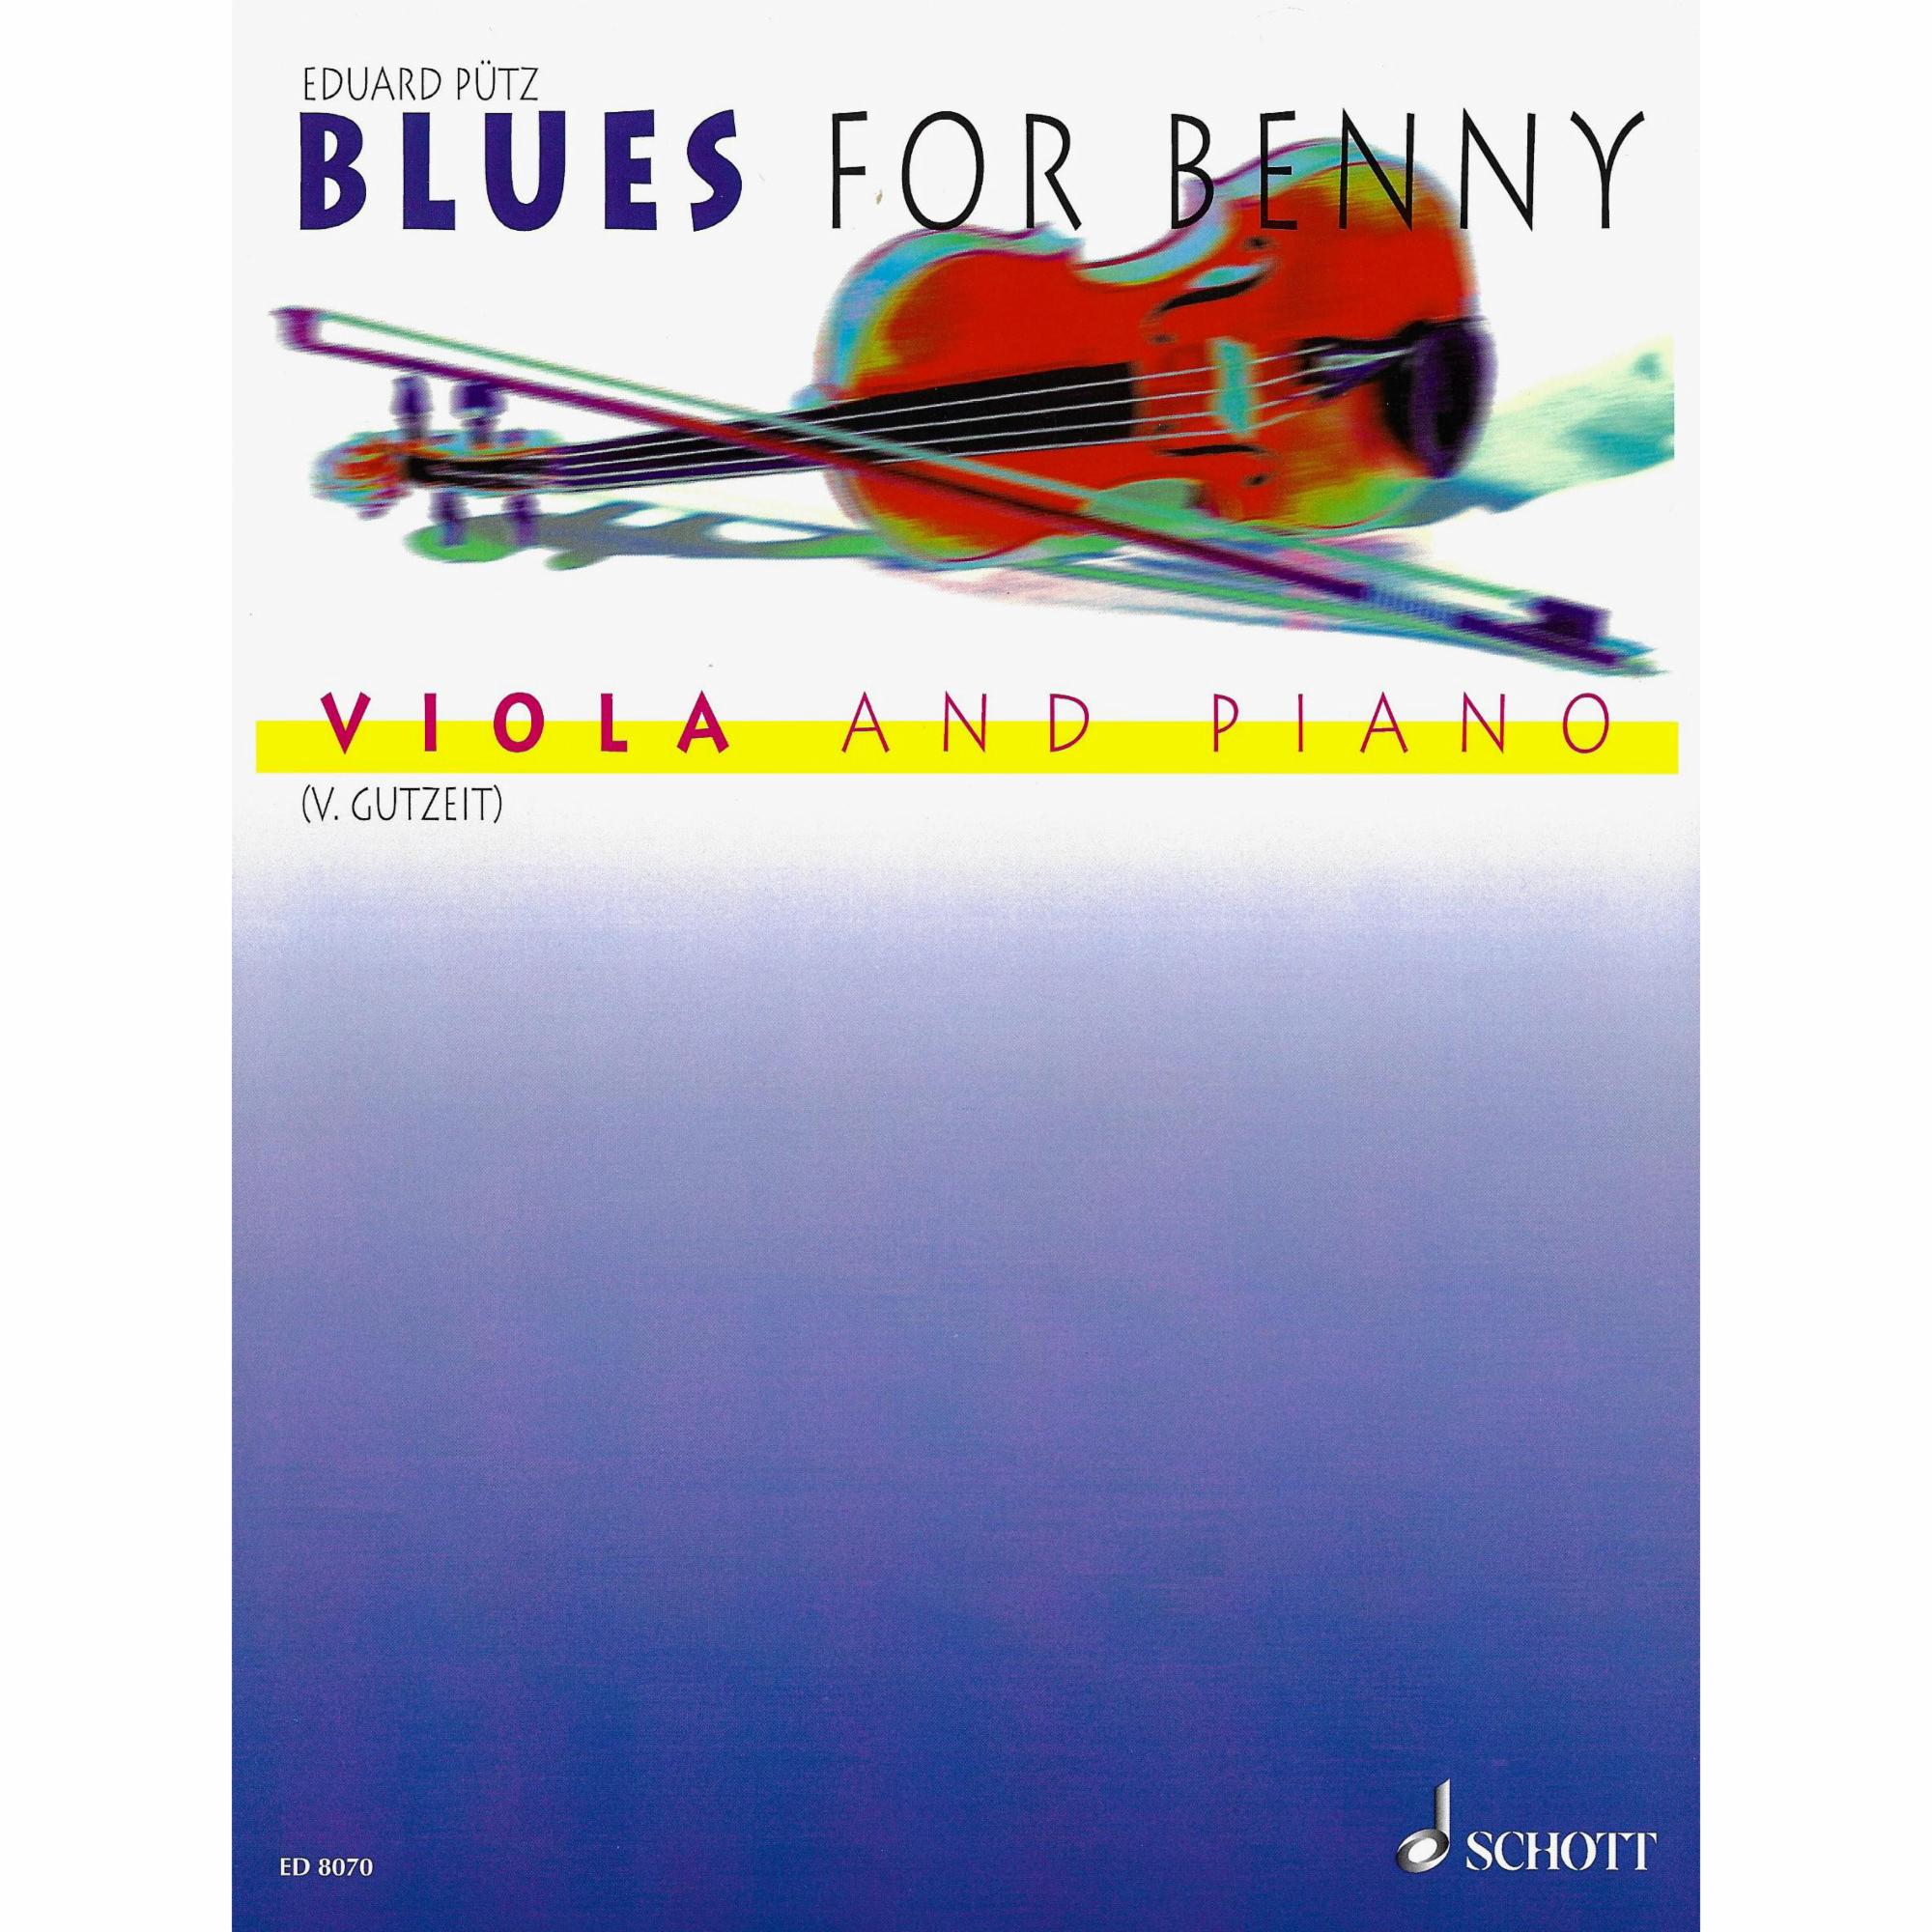 Blues for Benni for Viola and Piano